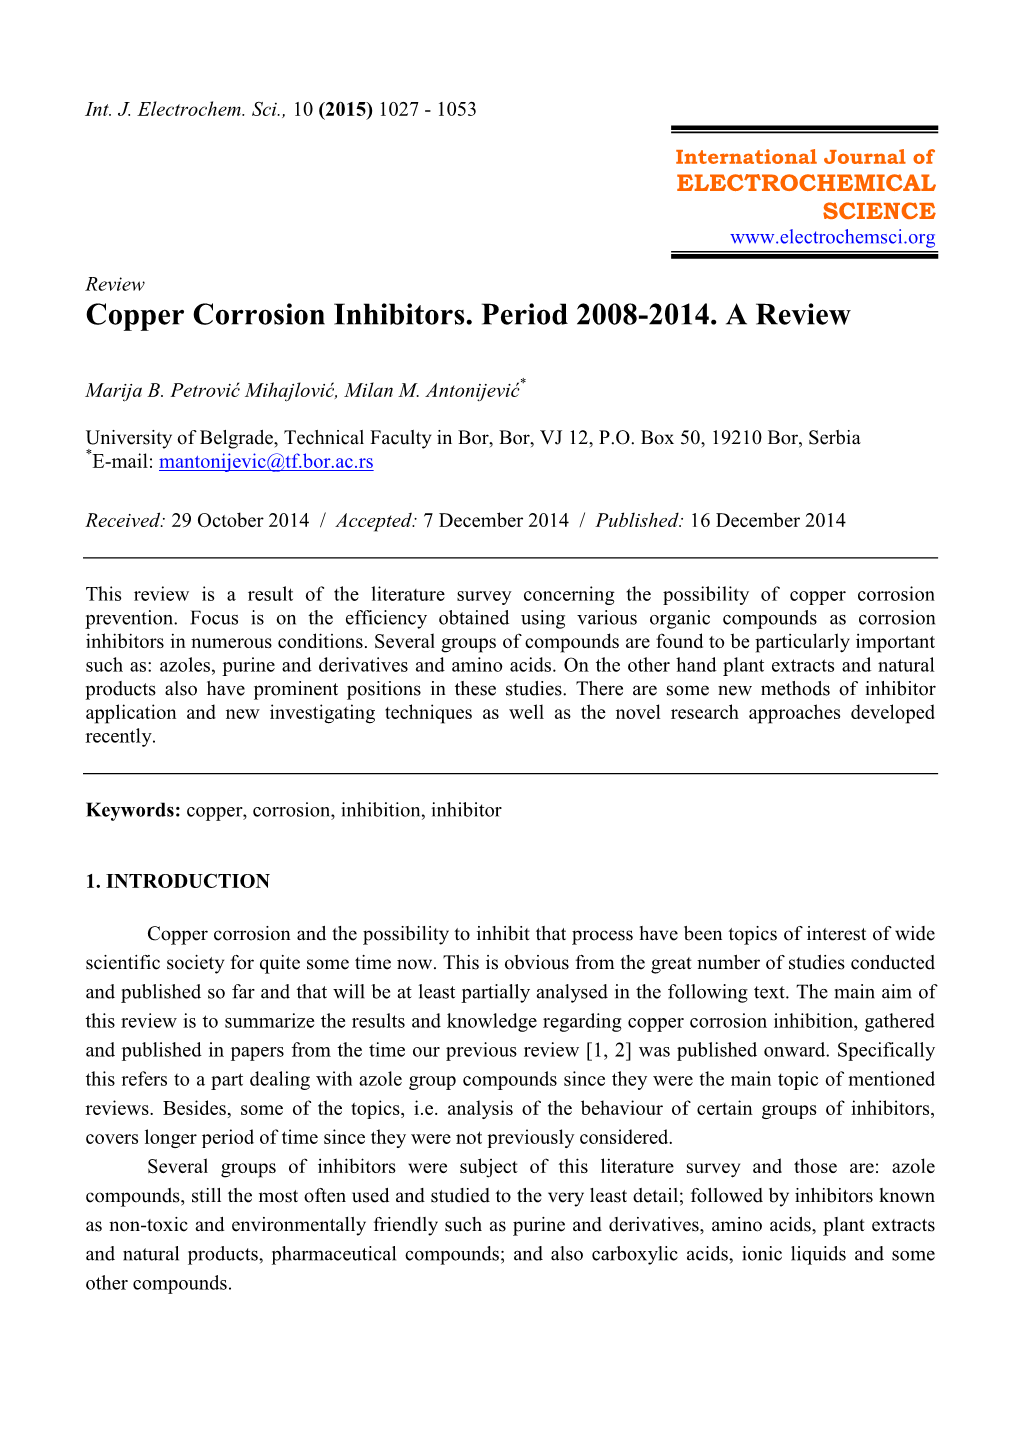 Copper Corrosion Inhibitors. Period 2008-2014. a Review